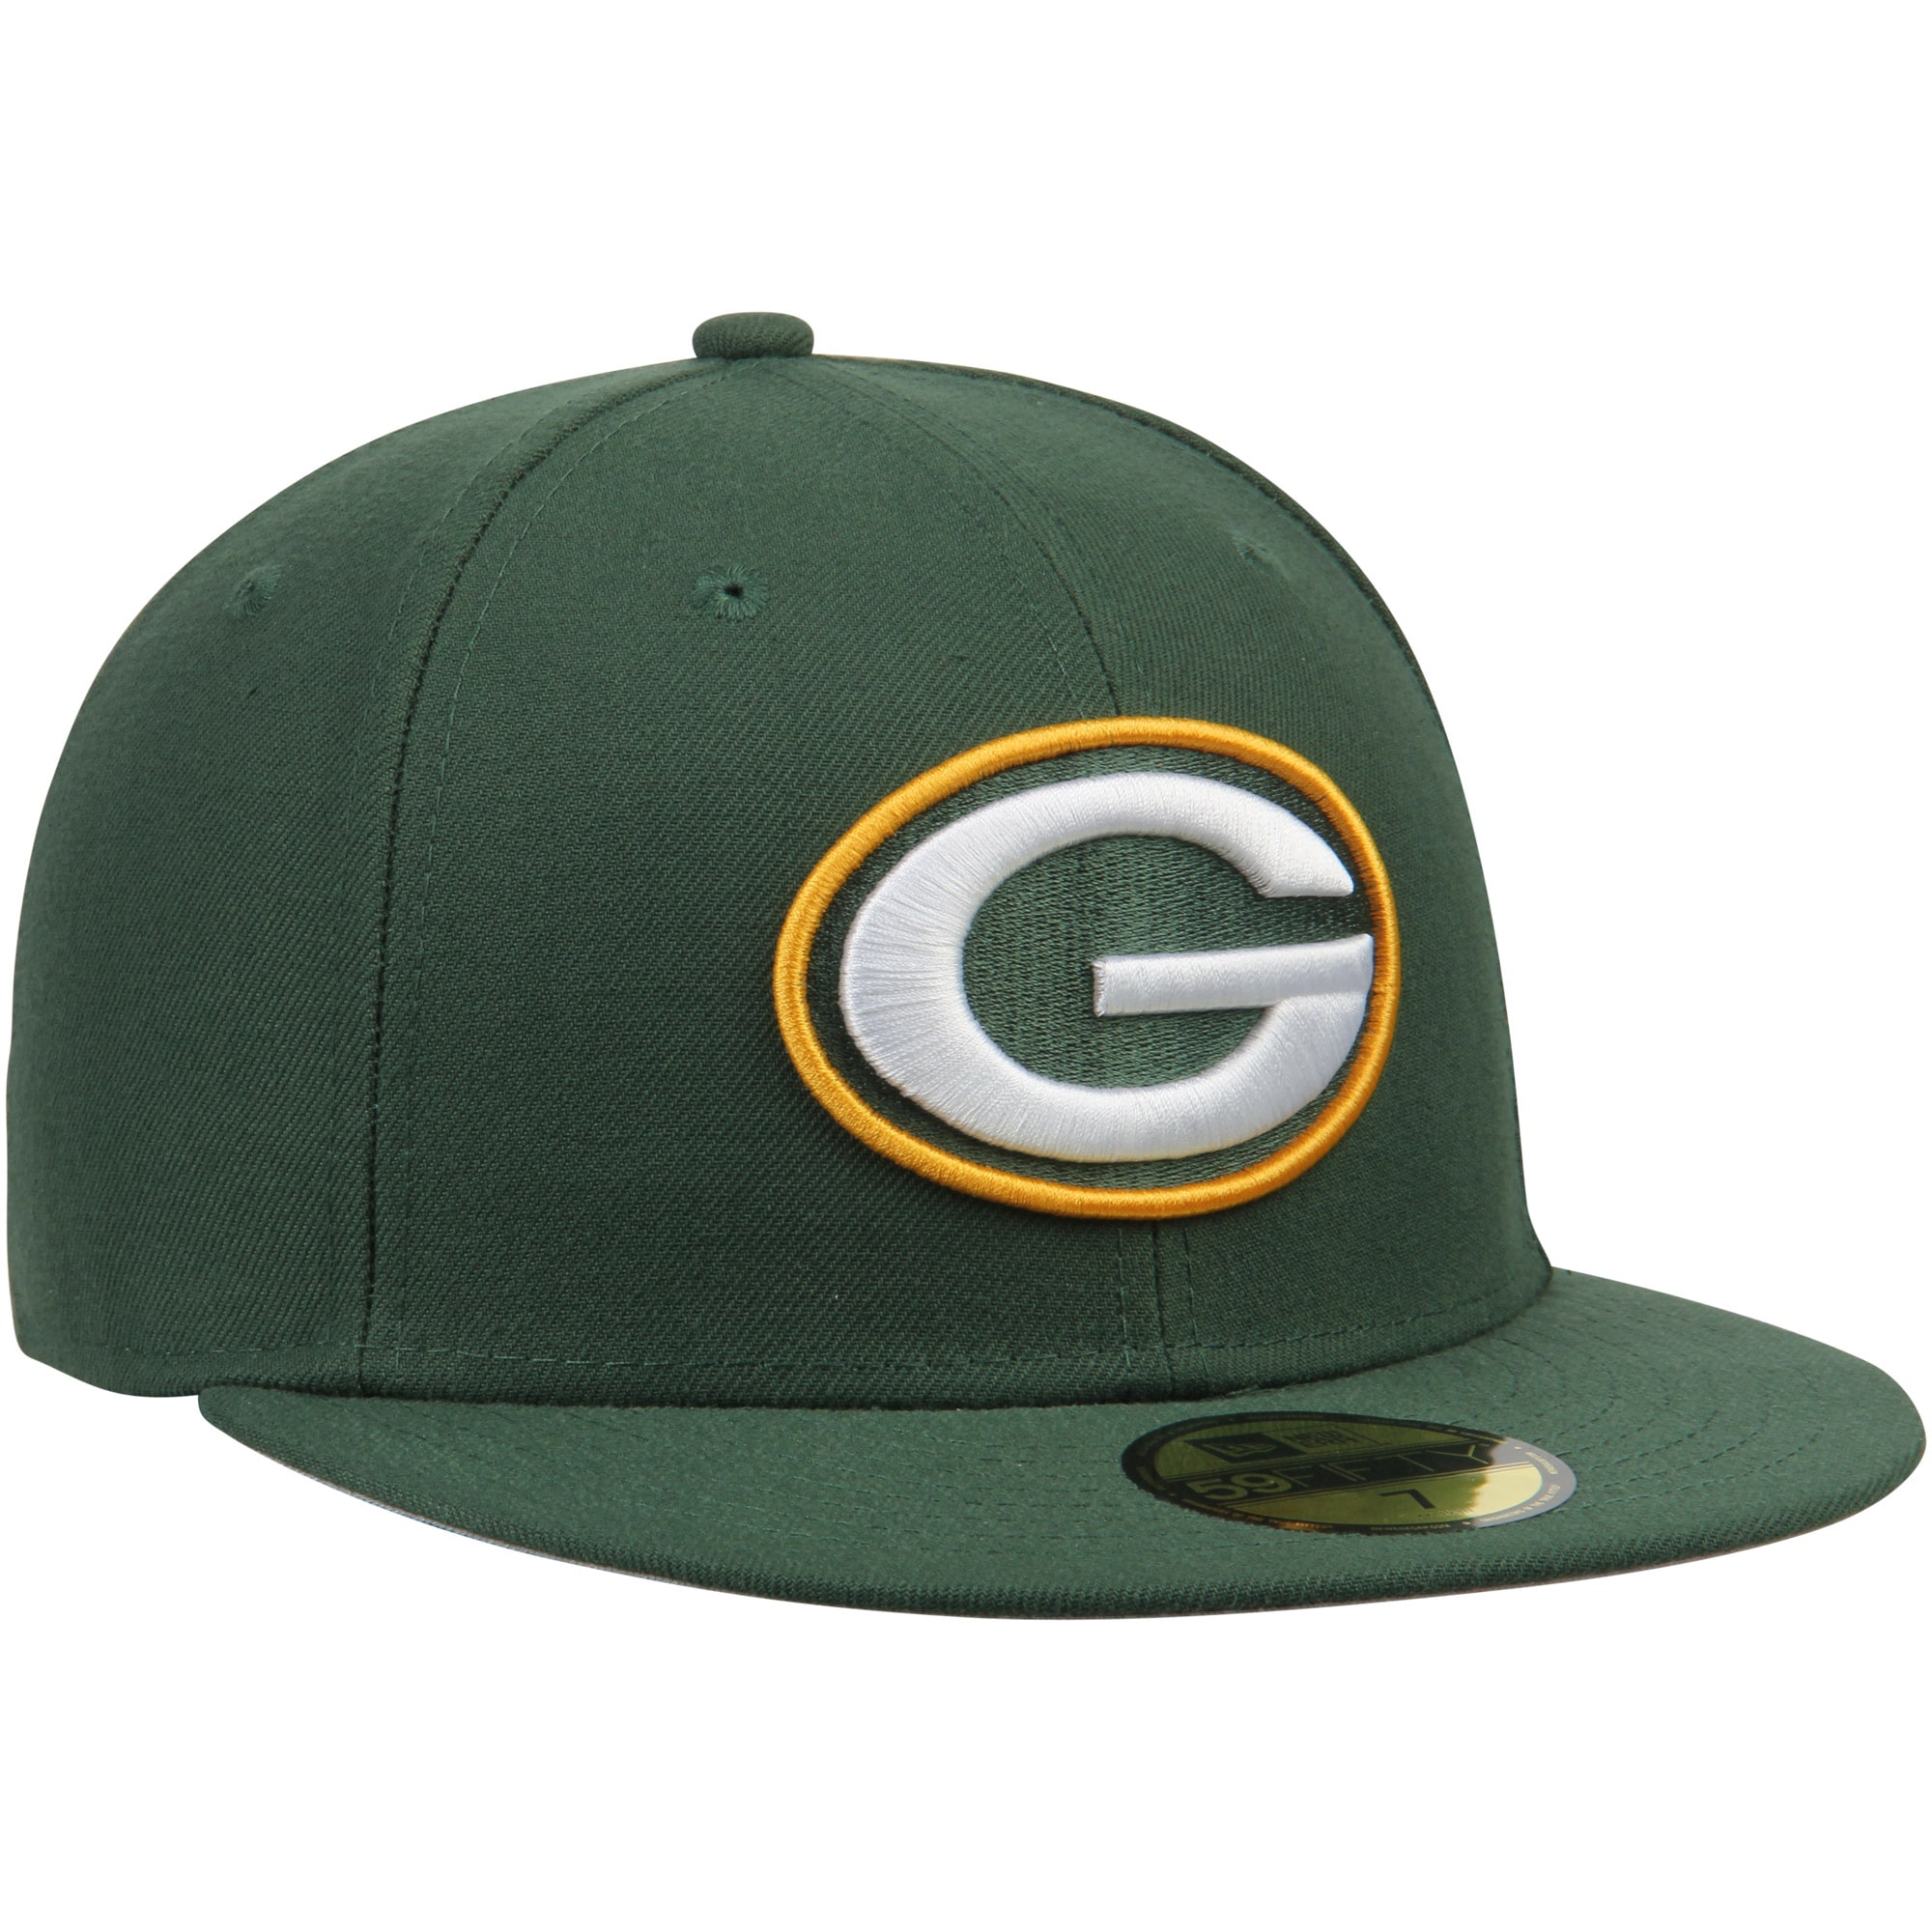 Men's New Era Green Green Bay Packers Omaha 59FIFTY Fitted Hat - image 2 of 4